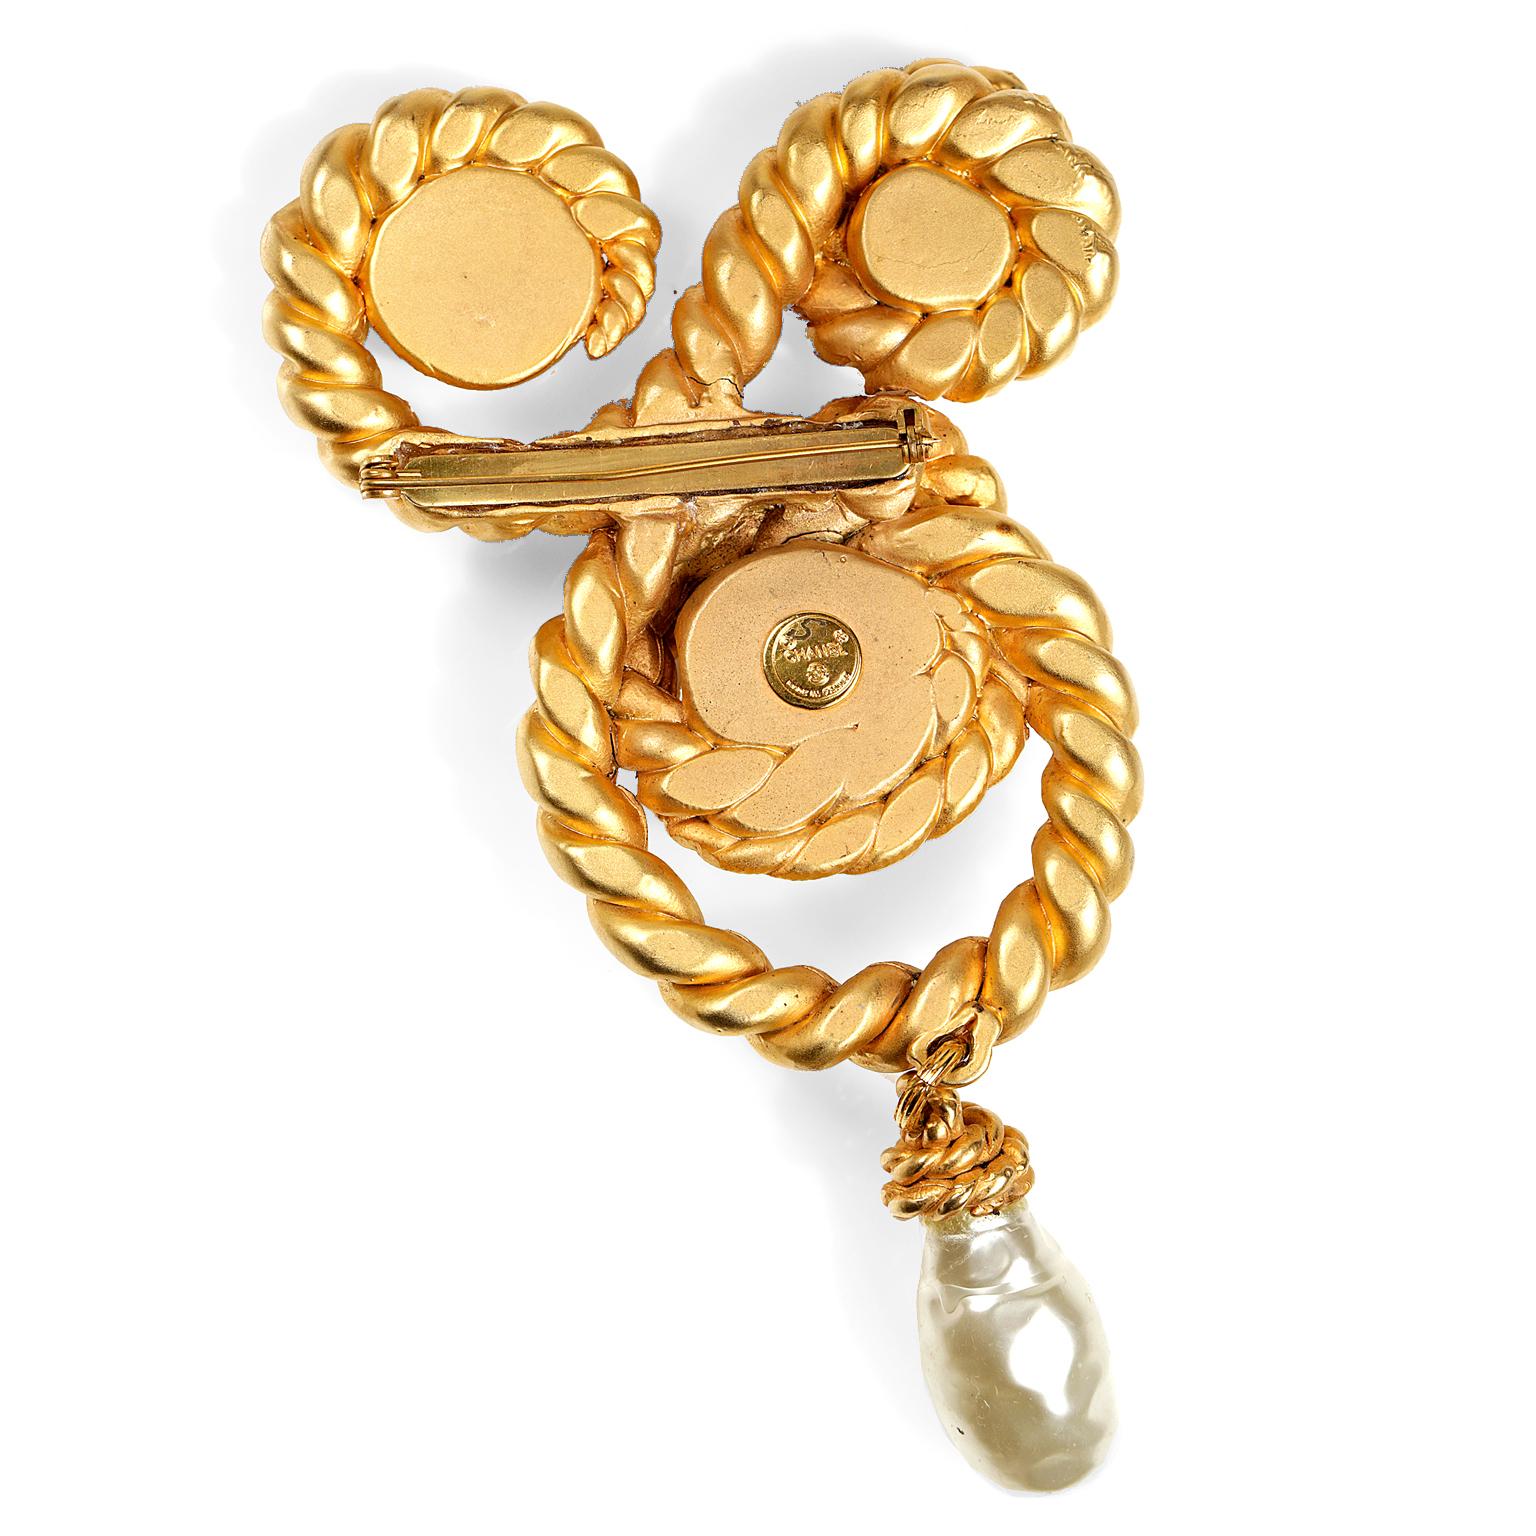 Chanel Pearl and Gold Rope Pin- mint condition; Circa 1980’s, designed by Karl Lagerfeld.
 Matte gold swirling rope cradles three faux pearls.  A single baroque pearl dangles from the bottom.  Made in France. 
Measurements:  7”

